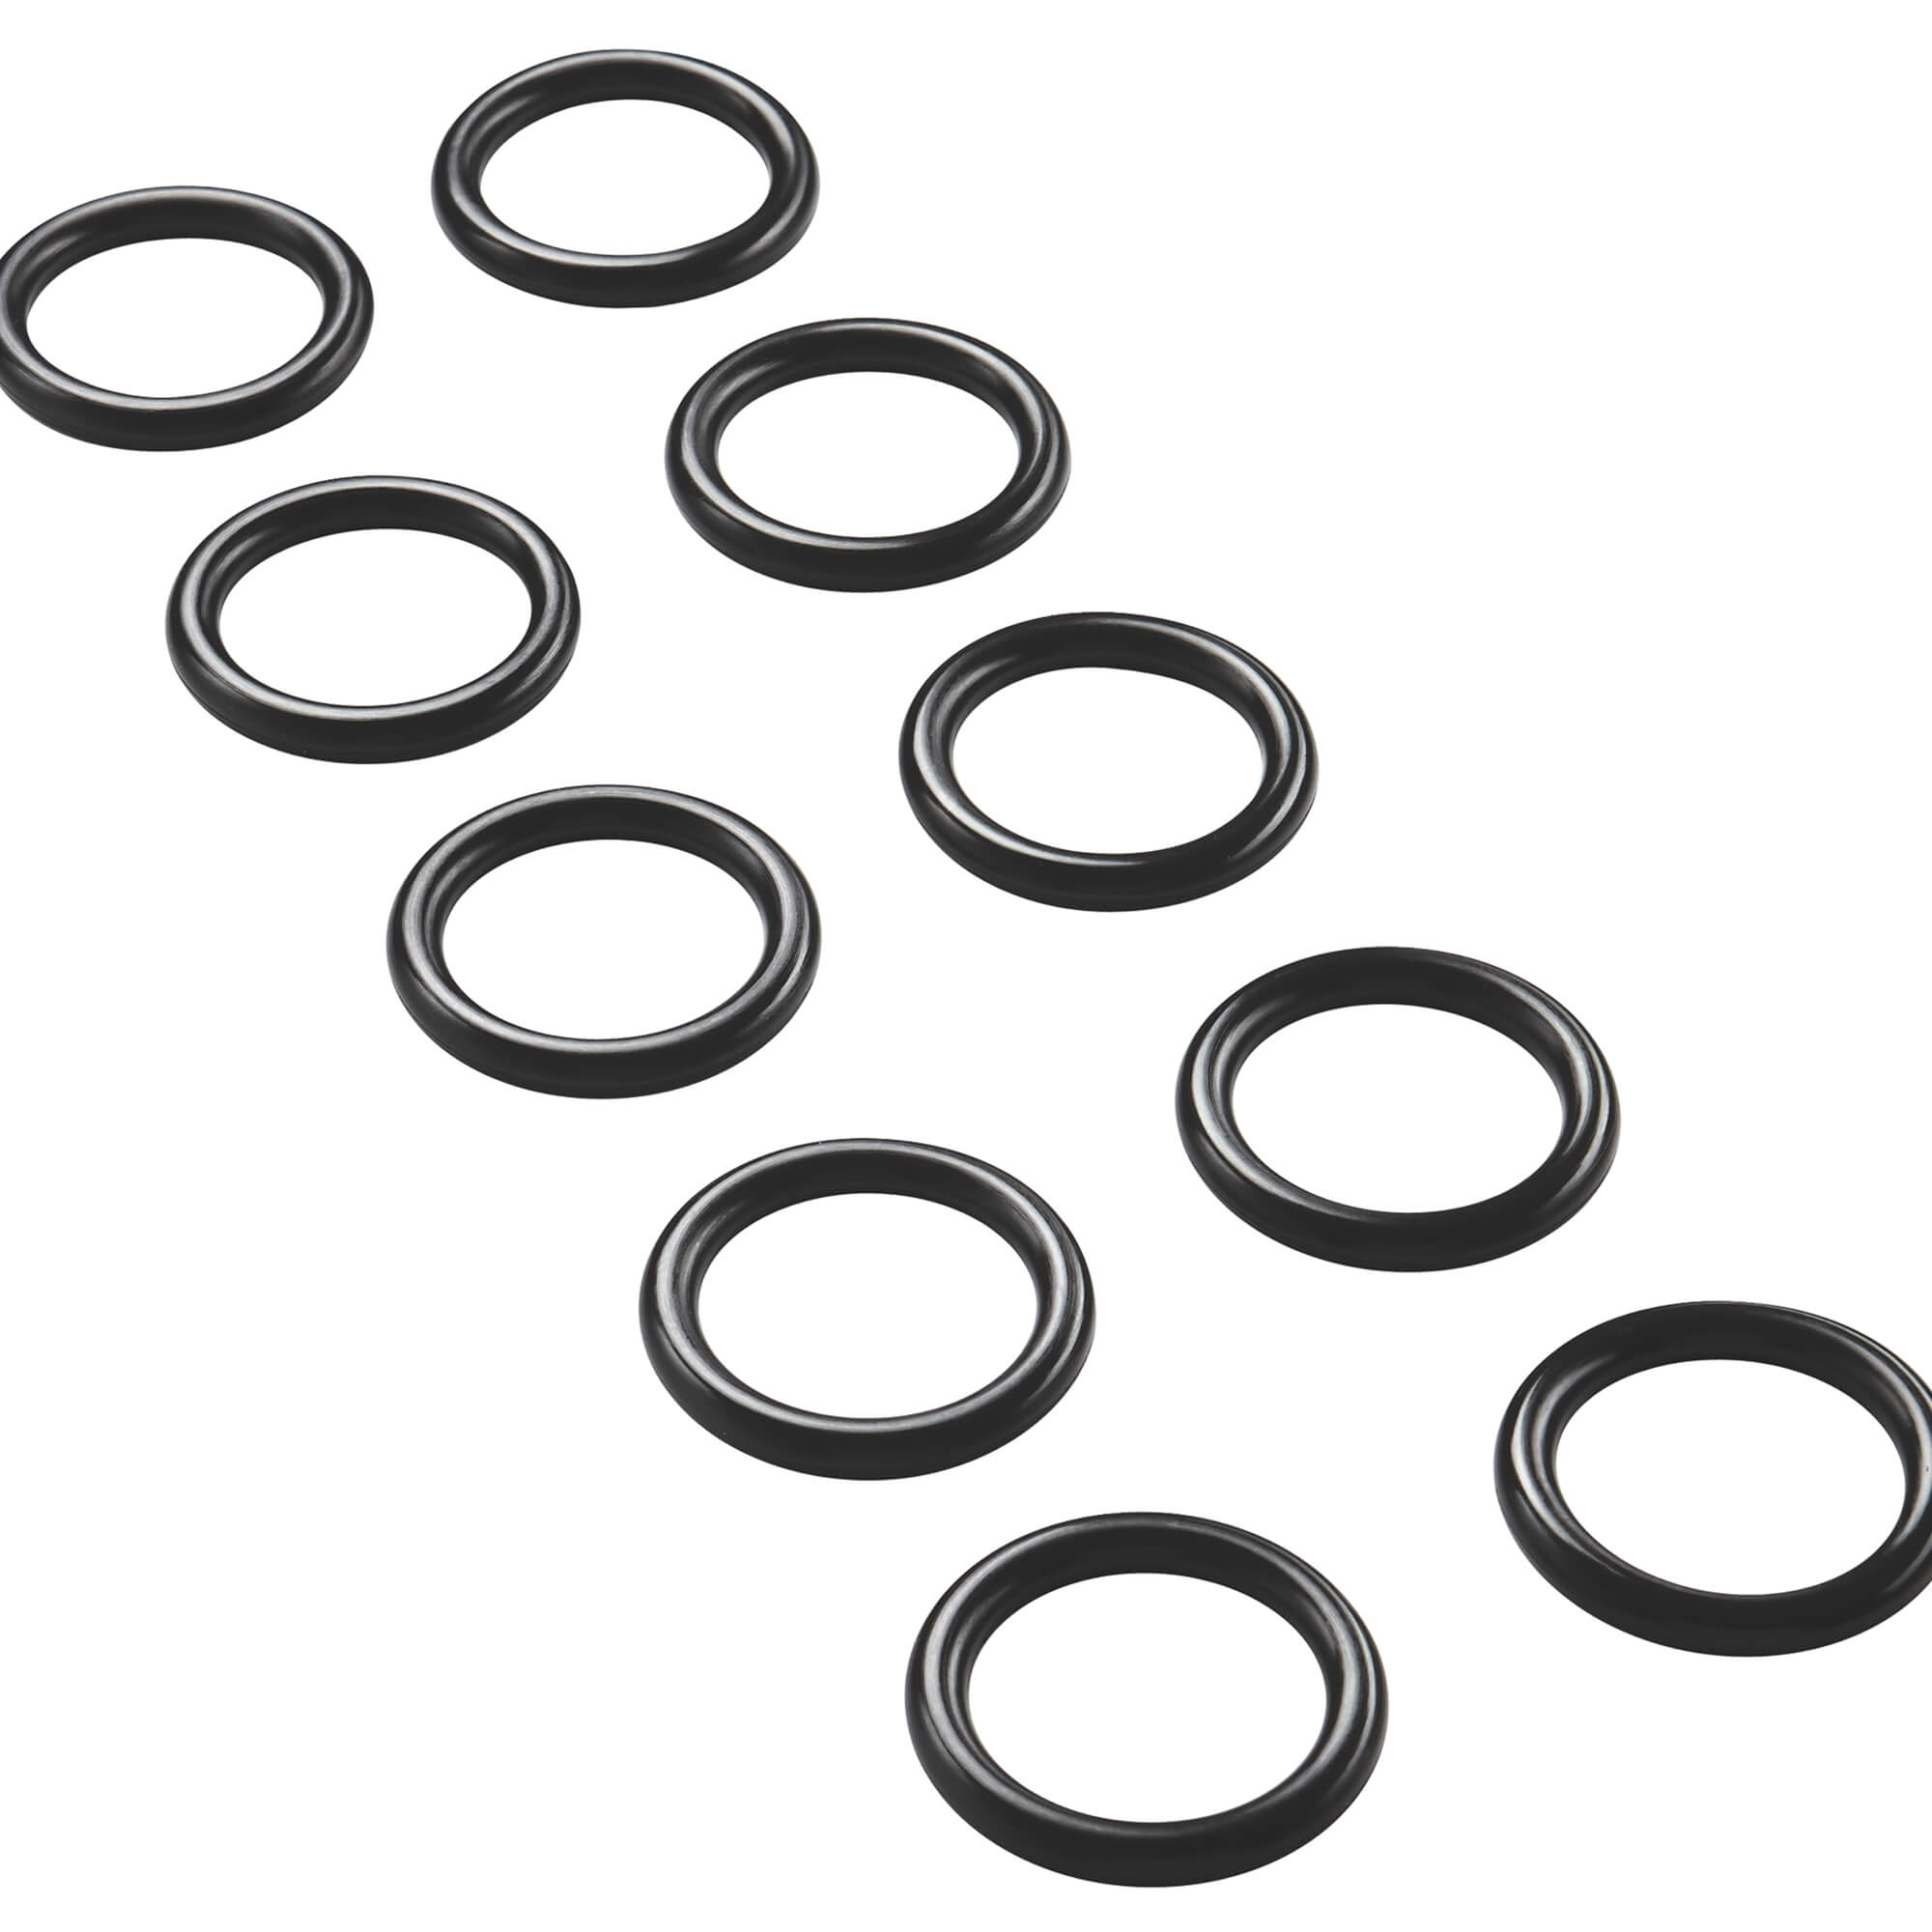 GROHE 3 x REPLACEMENT O RING SEALS 98066 for HANSGROHE GROHE STANDARD BATH PLUGS NEW 